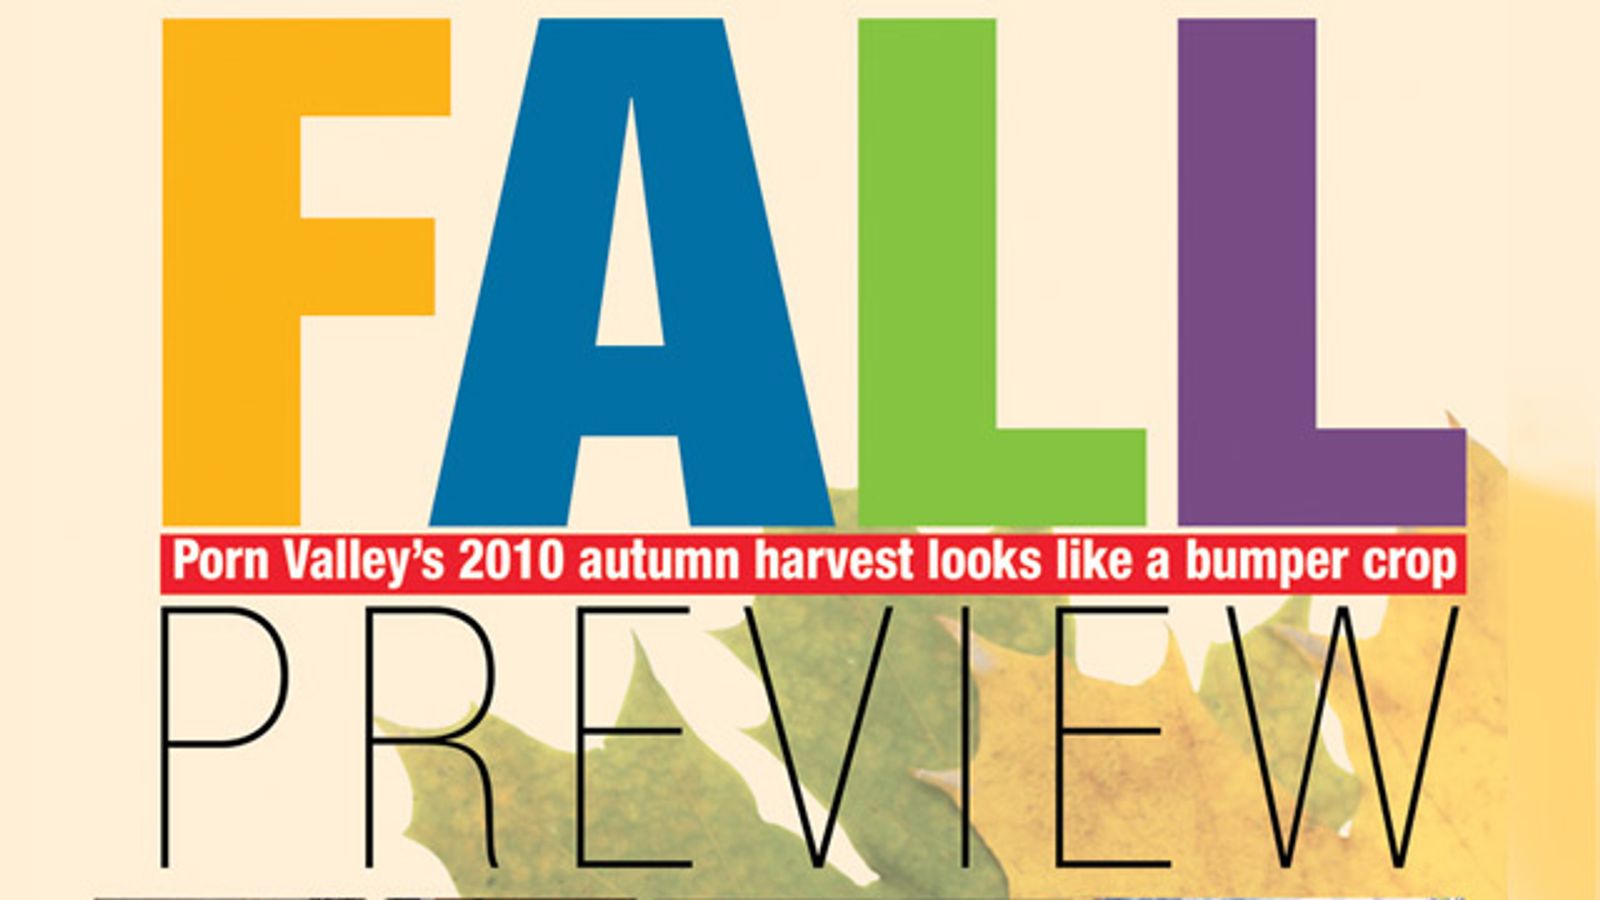 Legends of the Fall: Porn Valley's 2010 Autumn Harvest